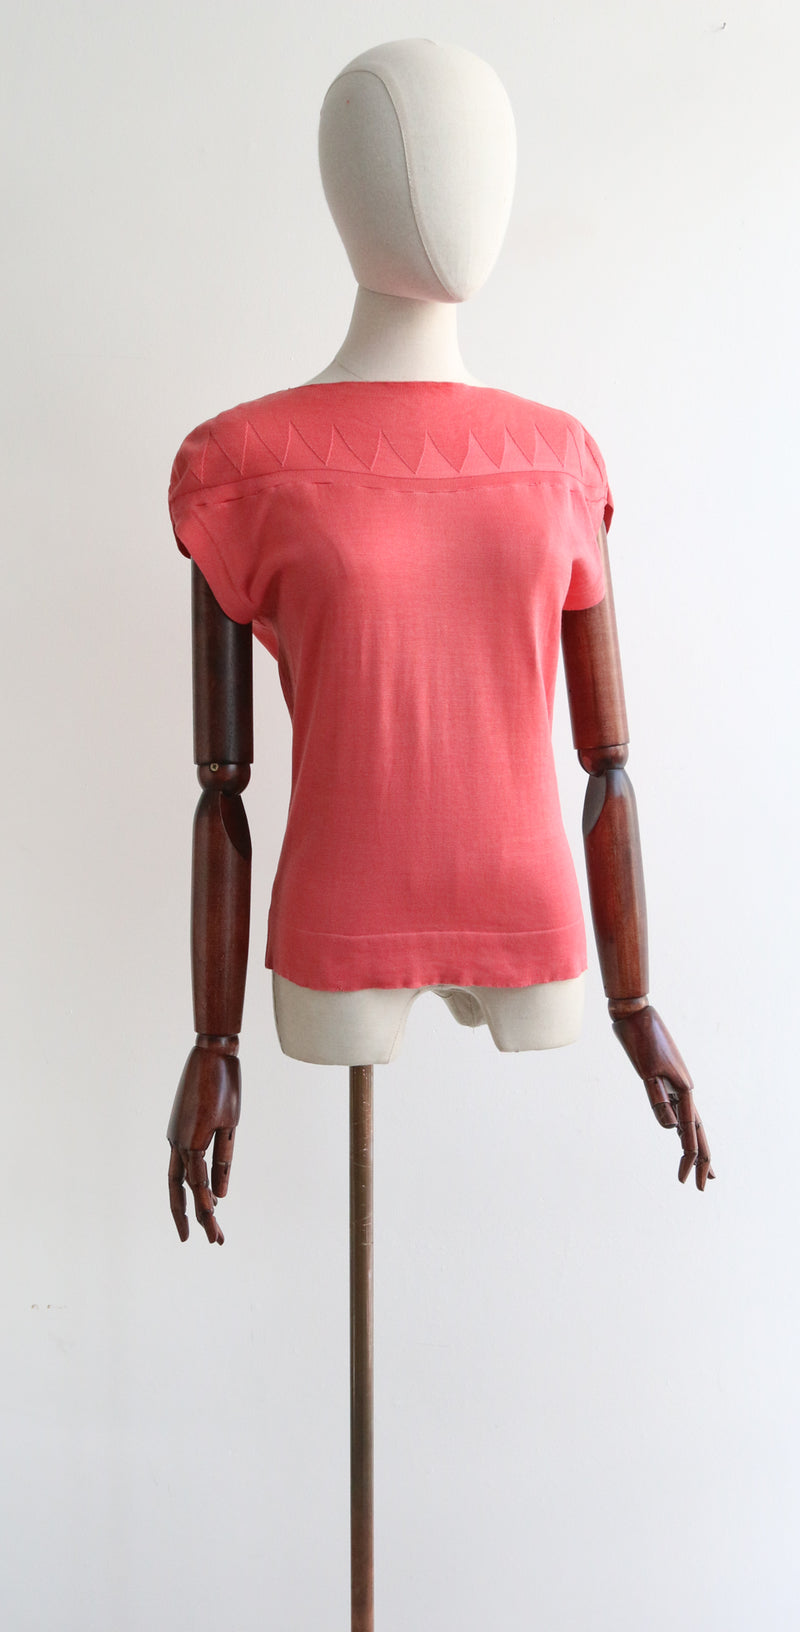 "Coral Pink Knit" Vintage 1940's Coral Pink Knitted Top UK 10-12 US 6-8